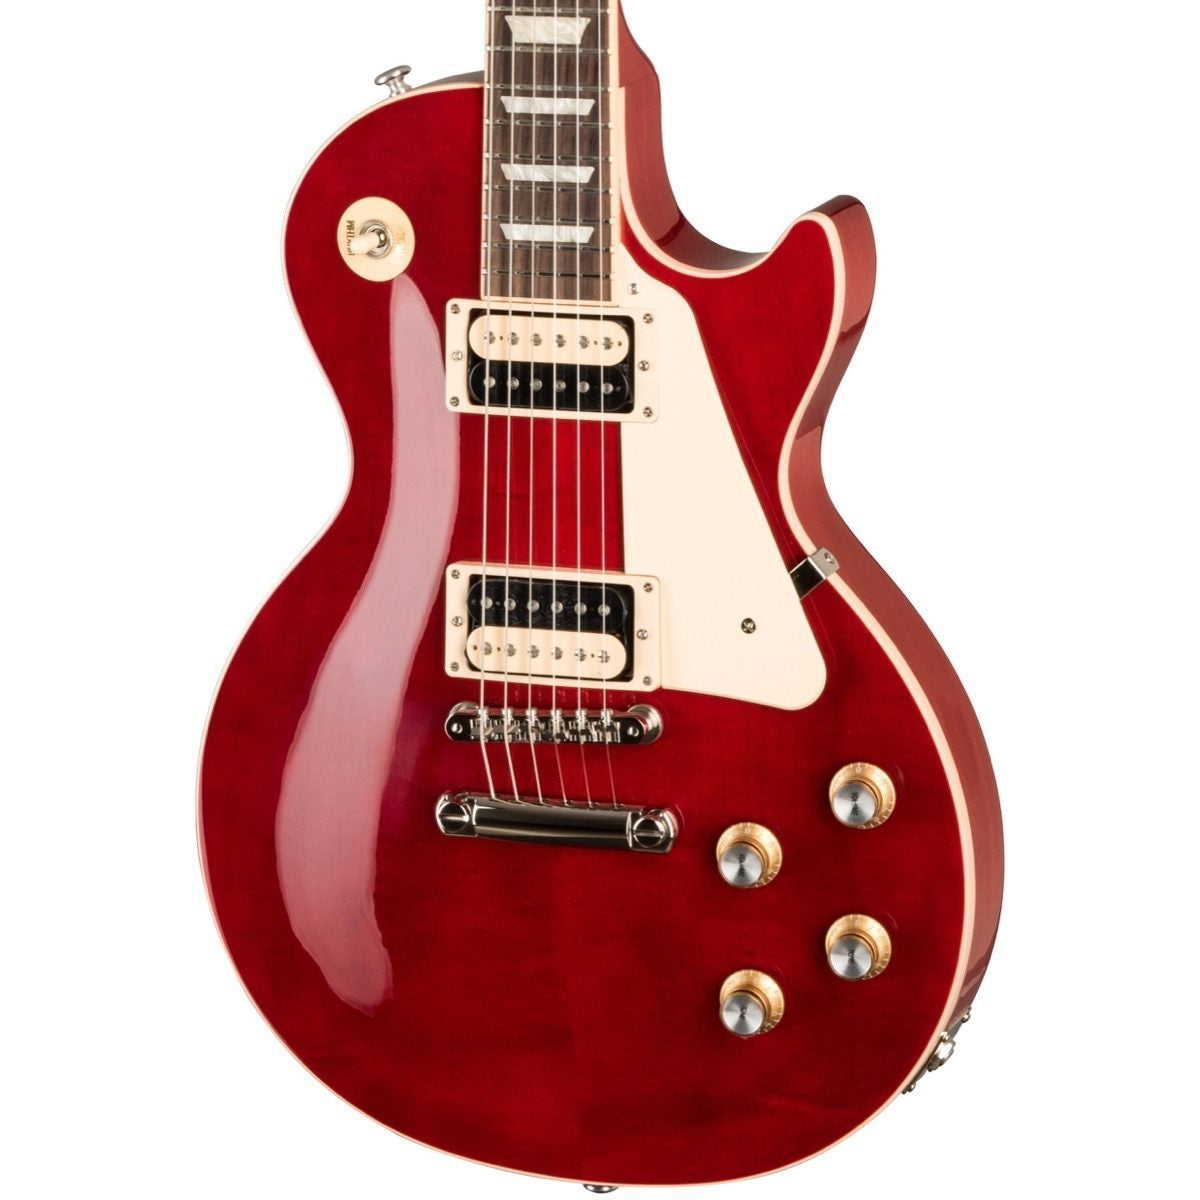 Gibson Les Paul Classic Electric Guitar, Translucent Cherry